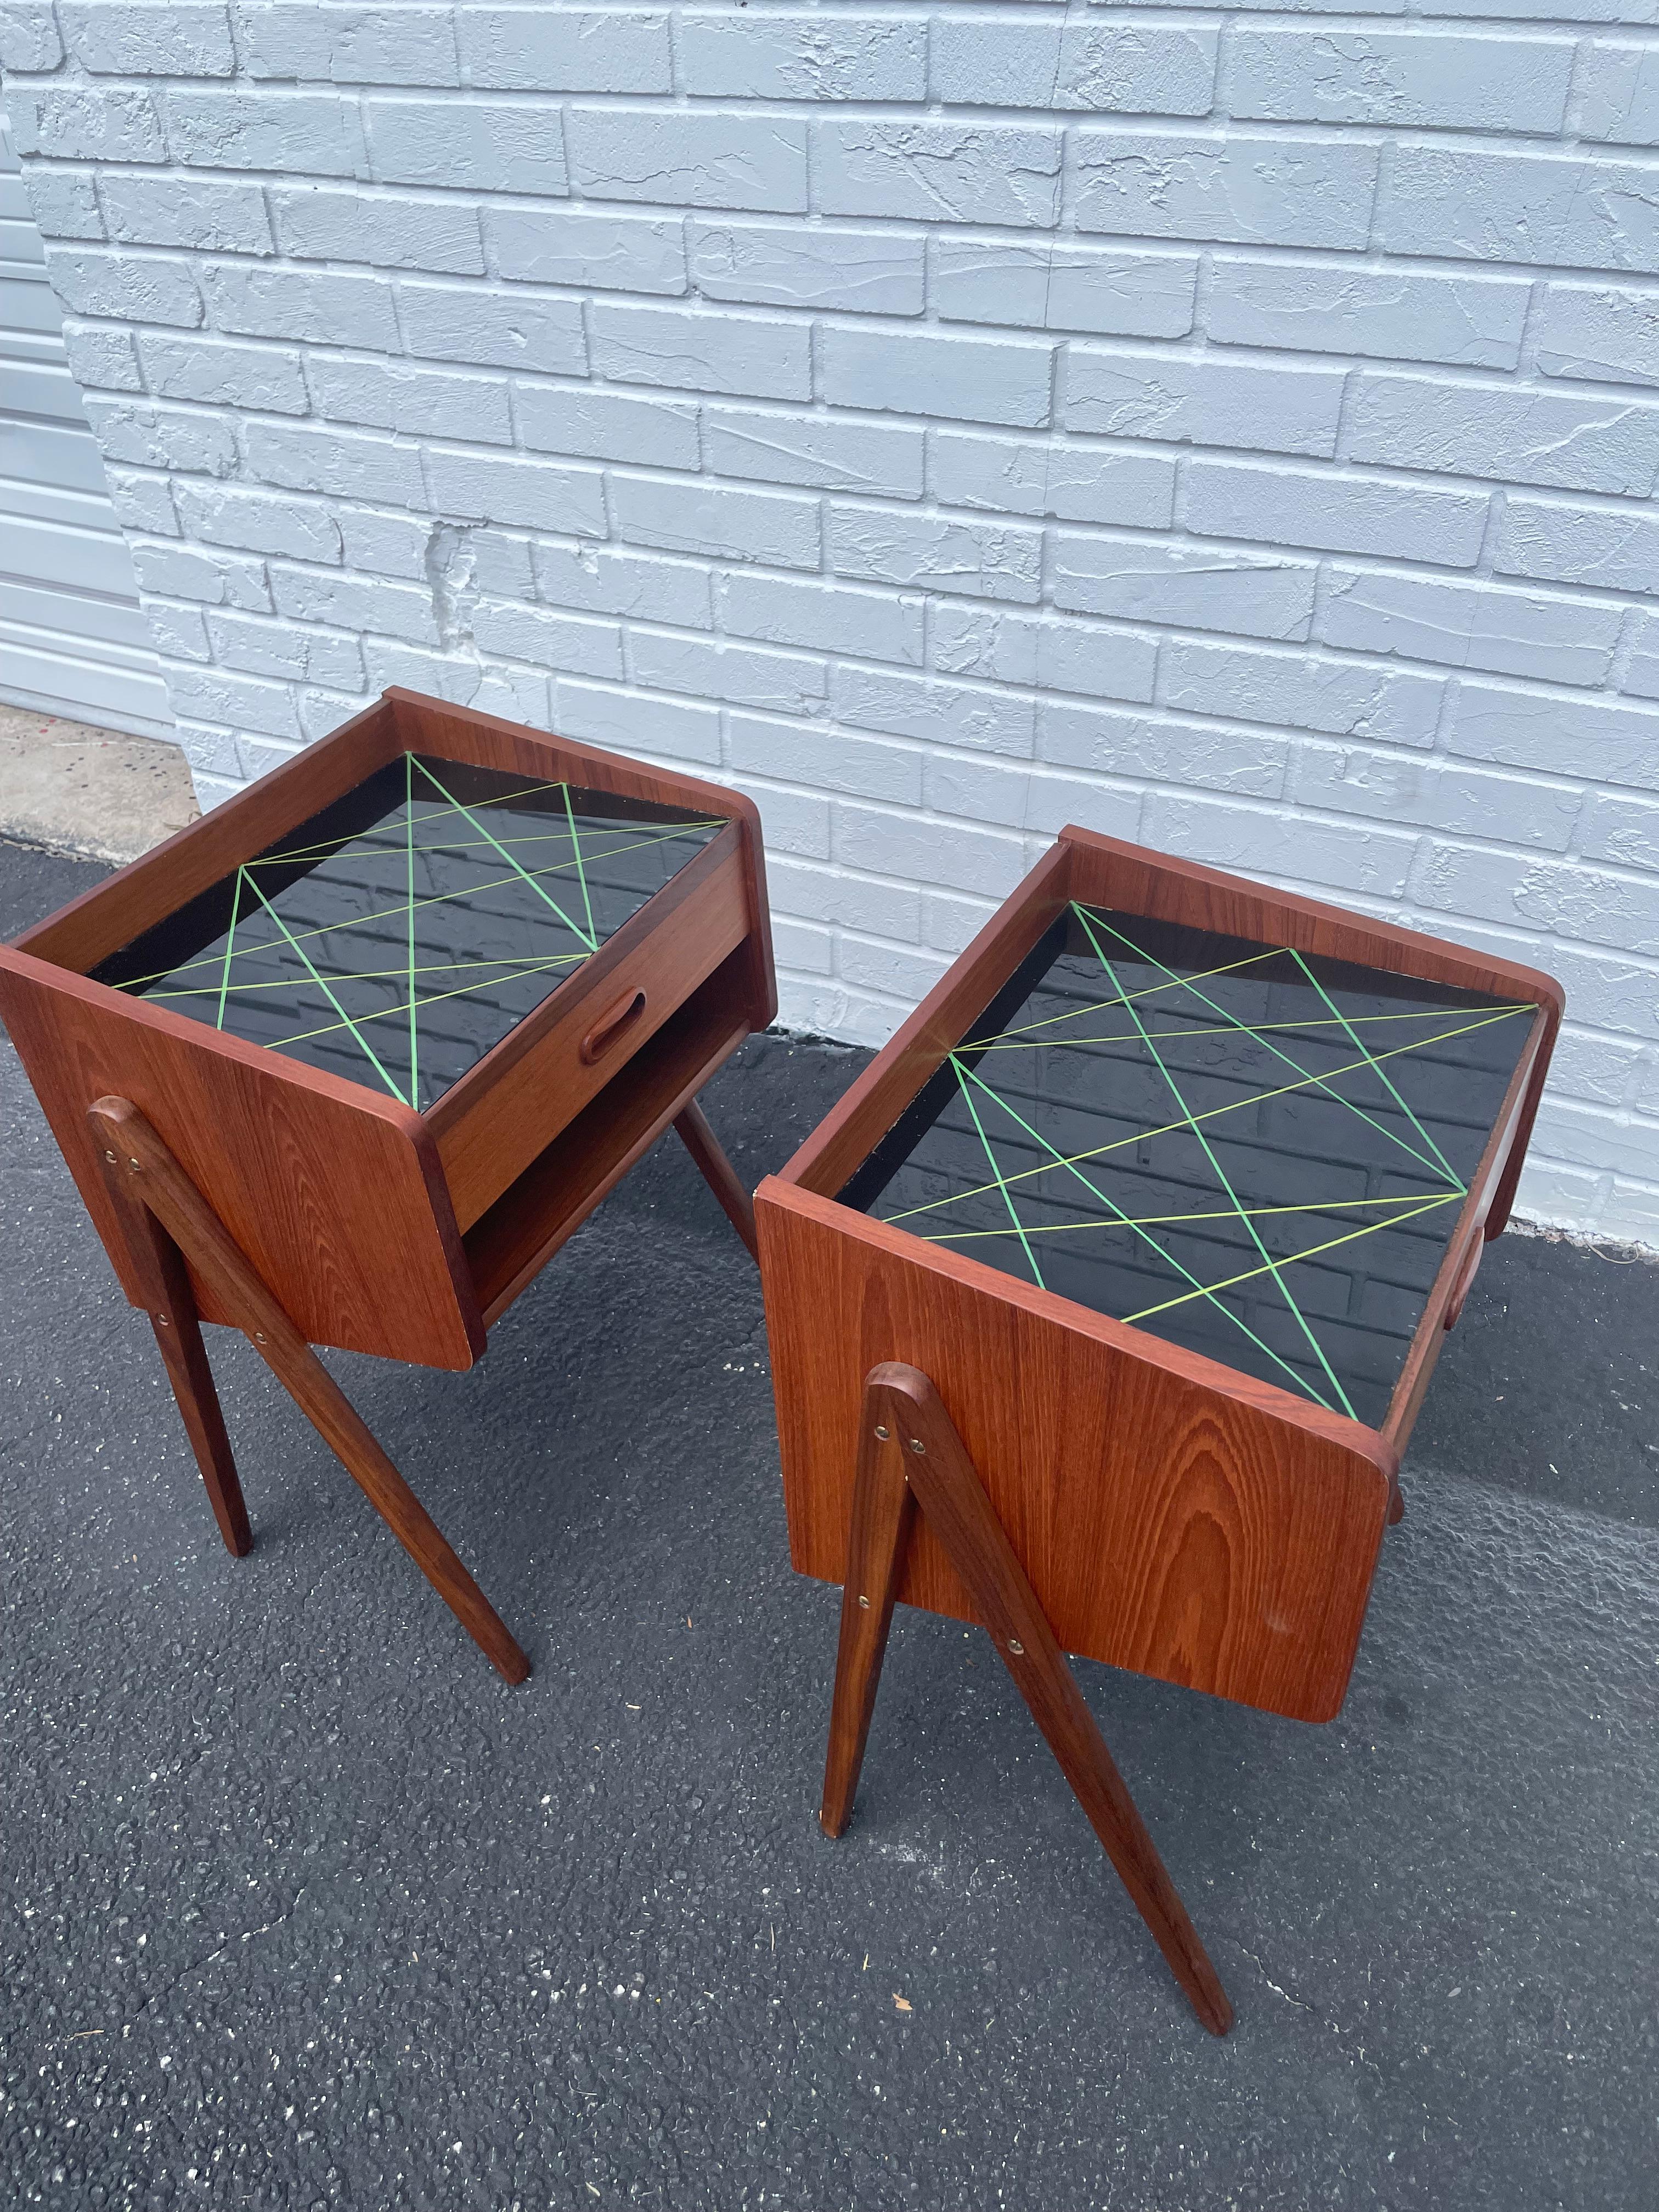 Mid-20th Century Danish Modern Side or End Tables - a Pair For Sale